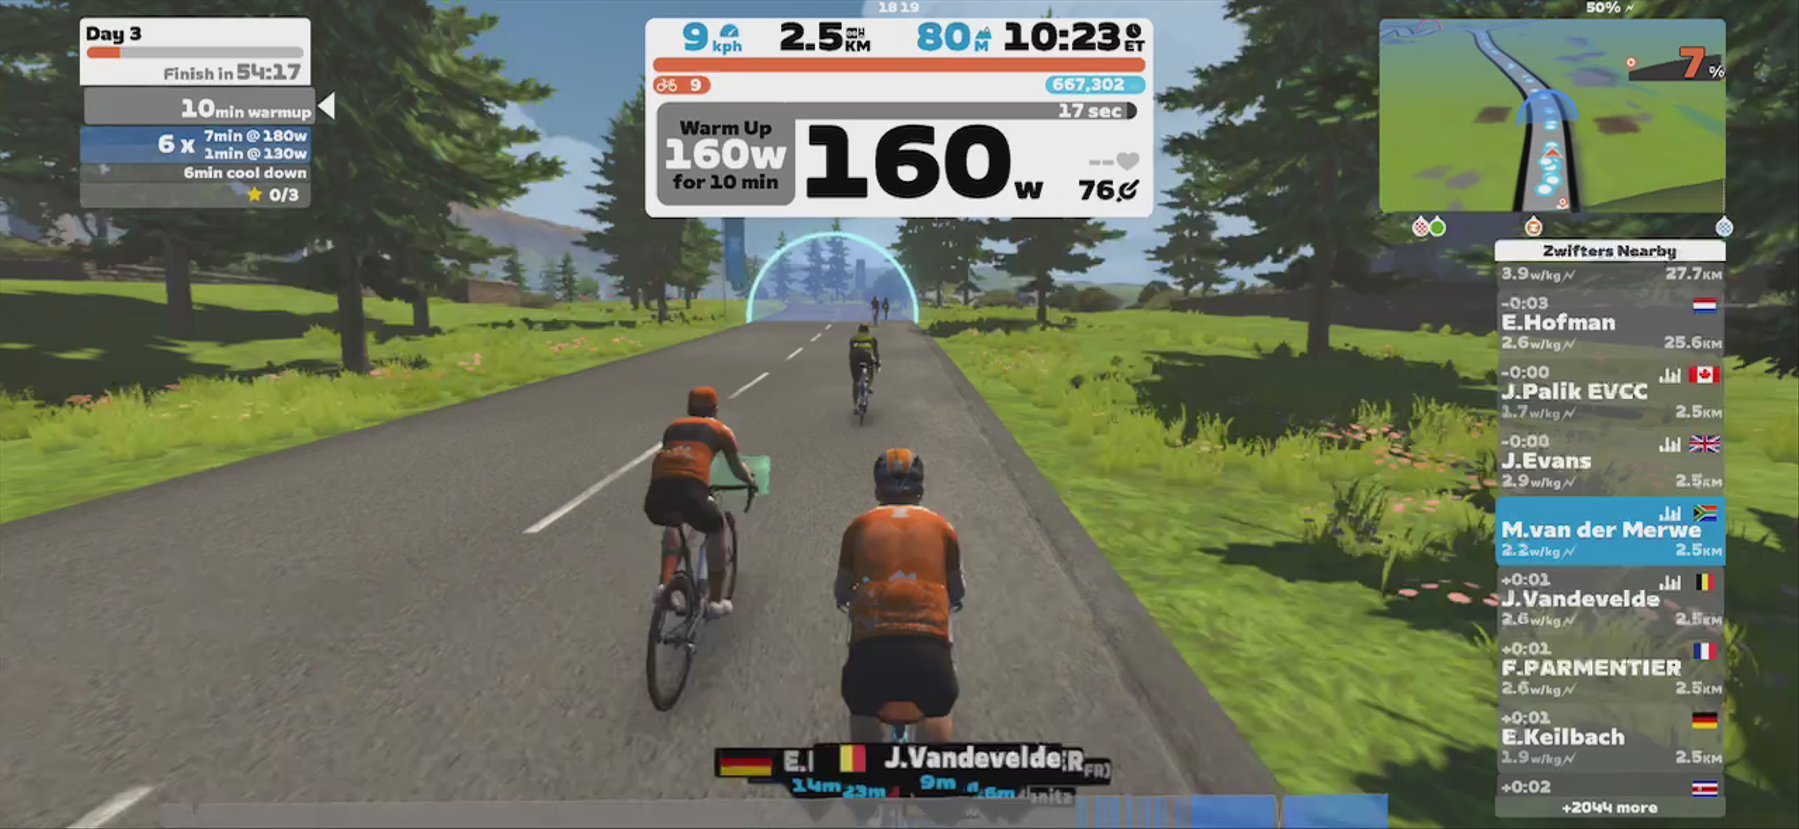 Zwift - Day 3 in France